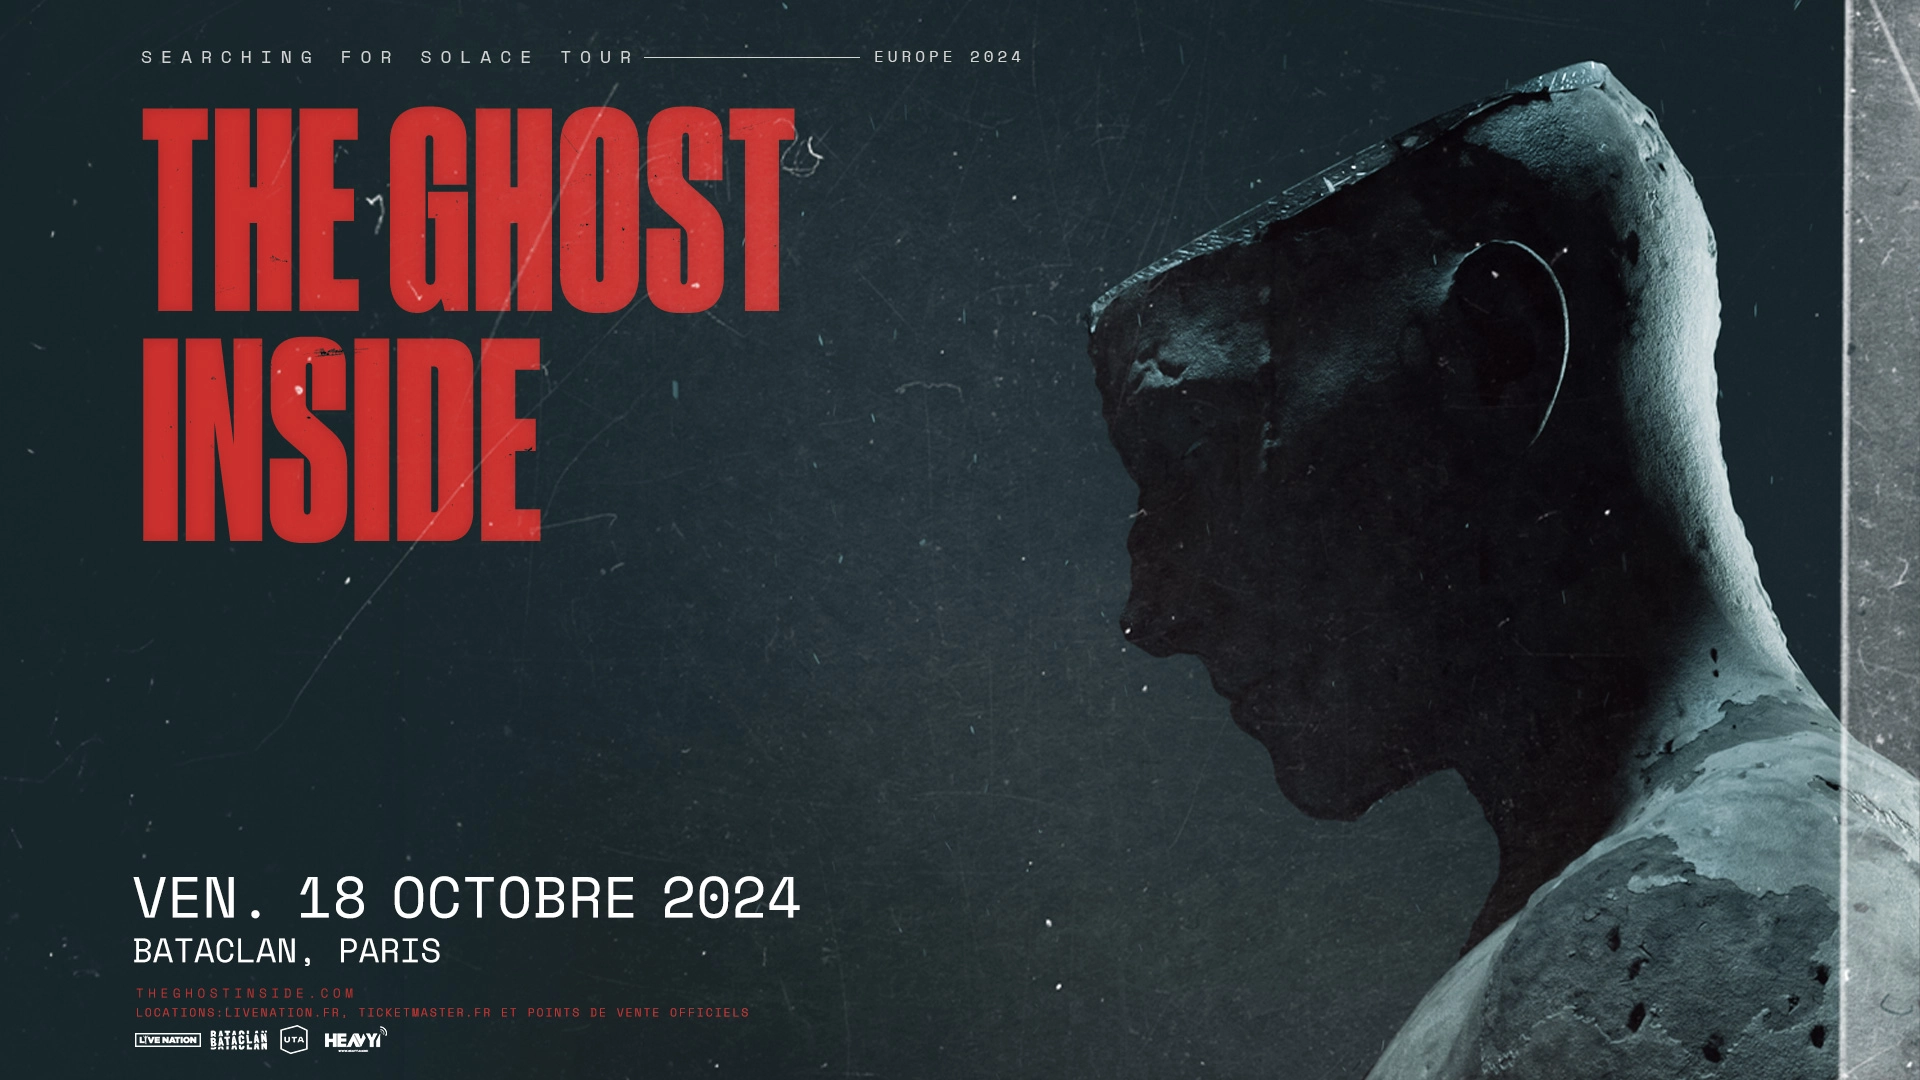 The Ghost Inside at Bataclan Tickets